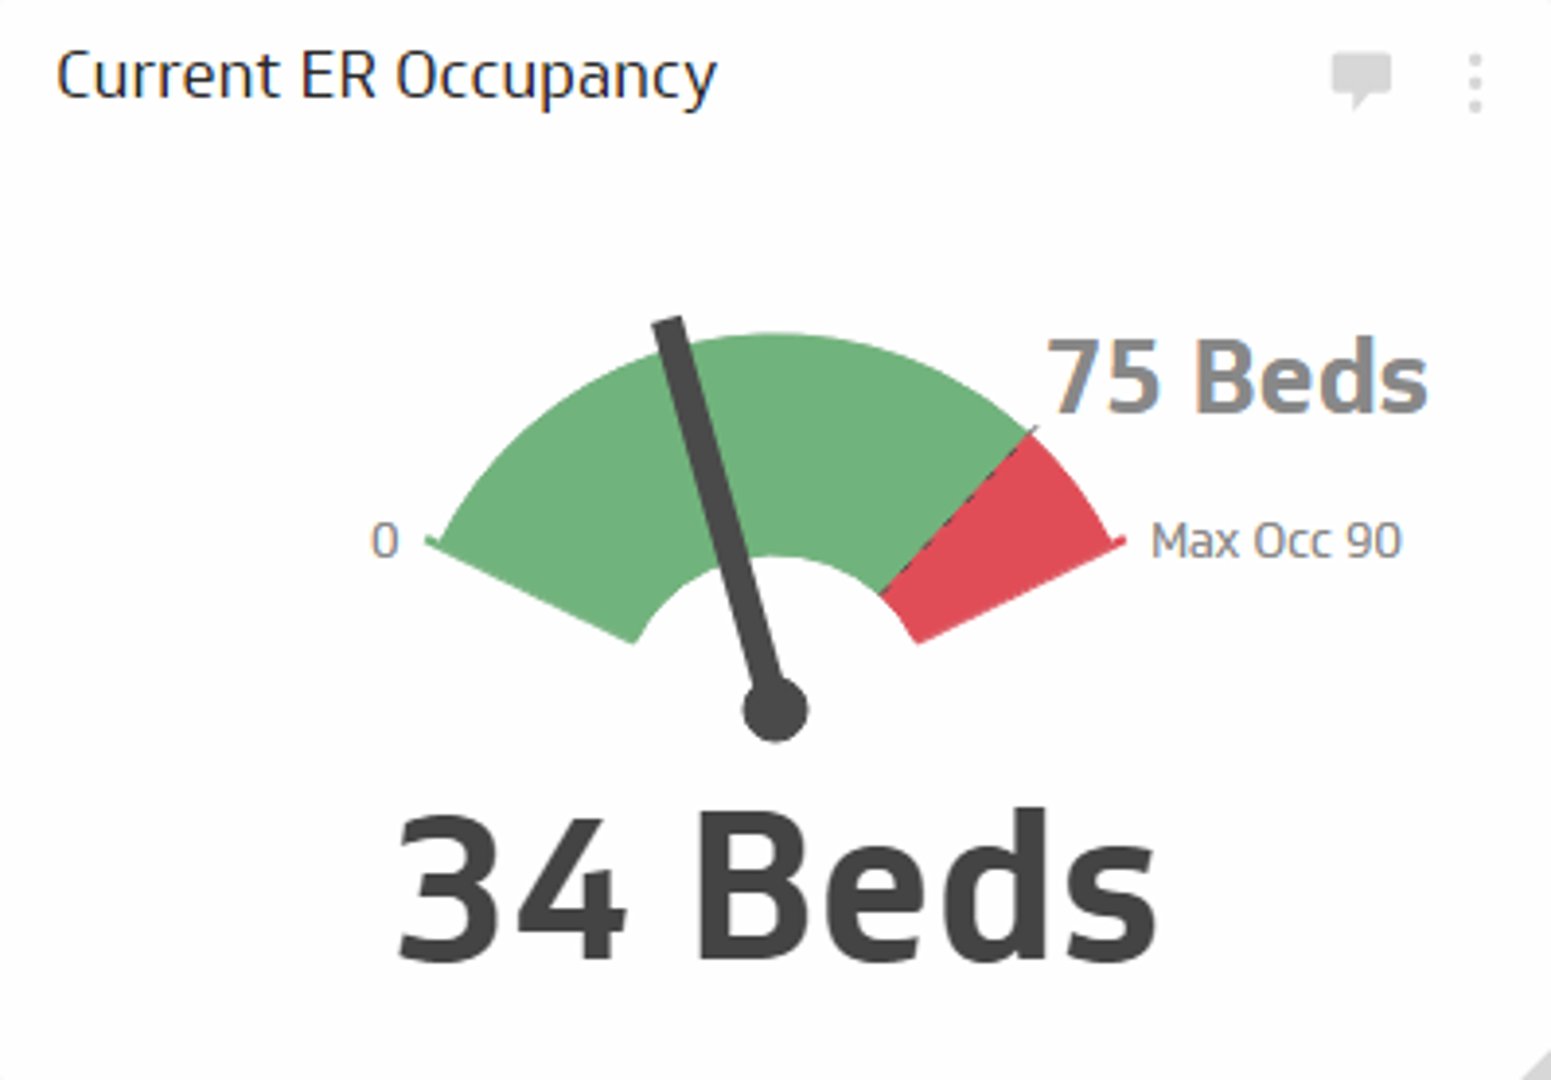 Healthcare KPI Example - Current ER Occupancy Metric